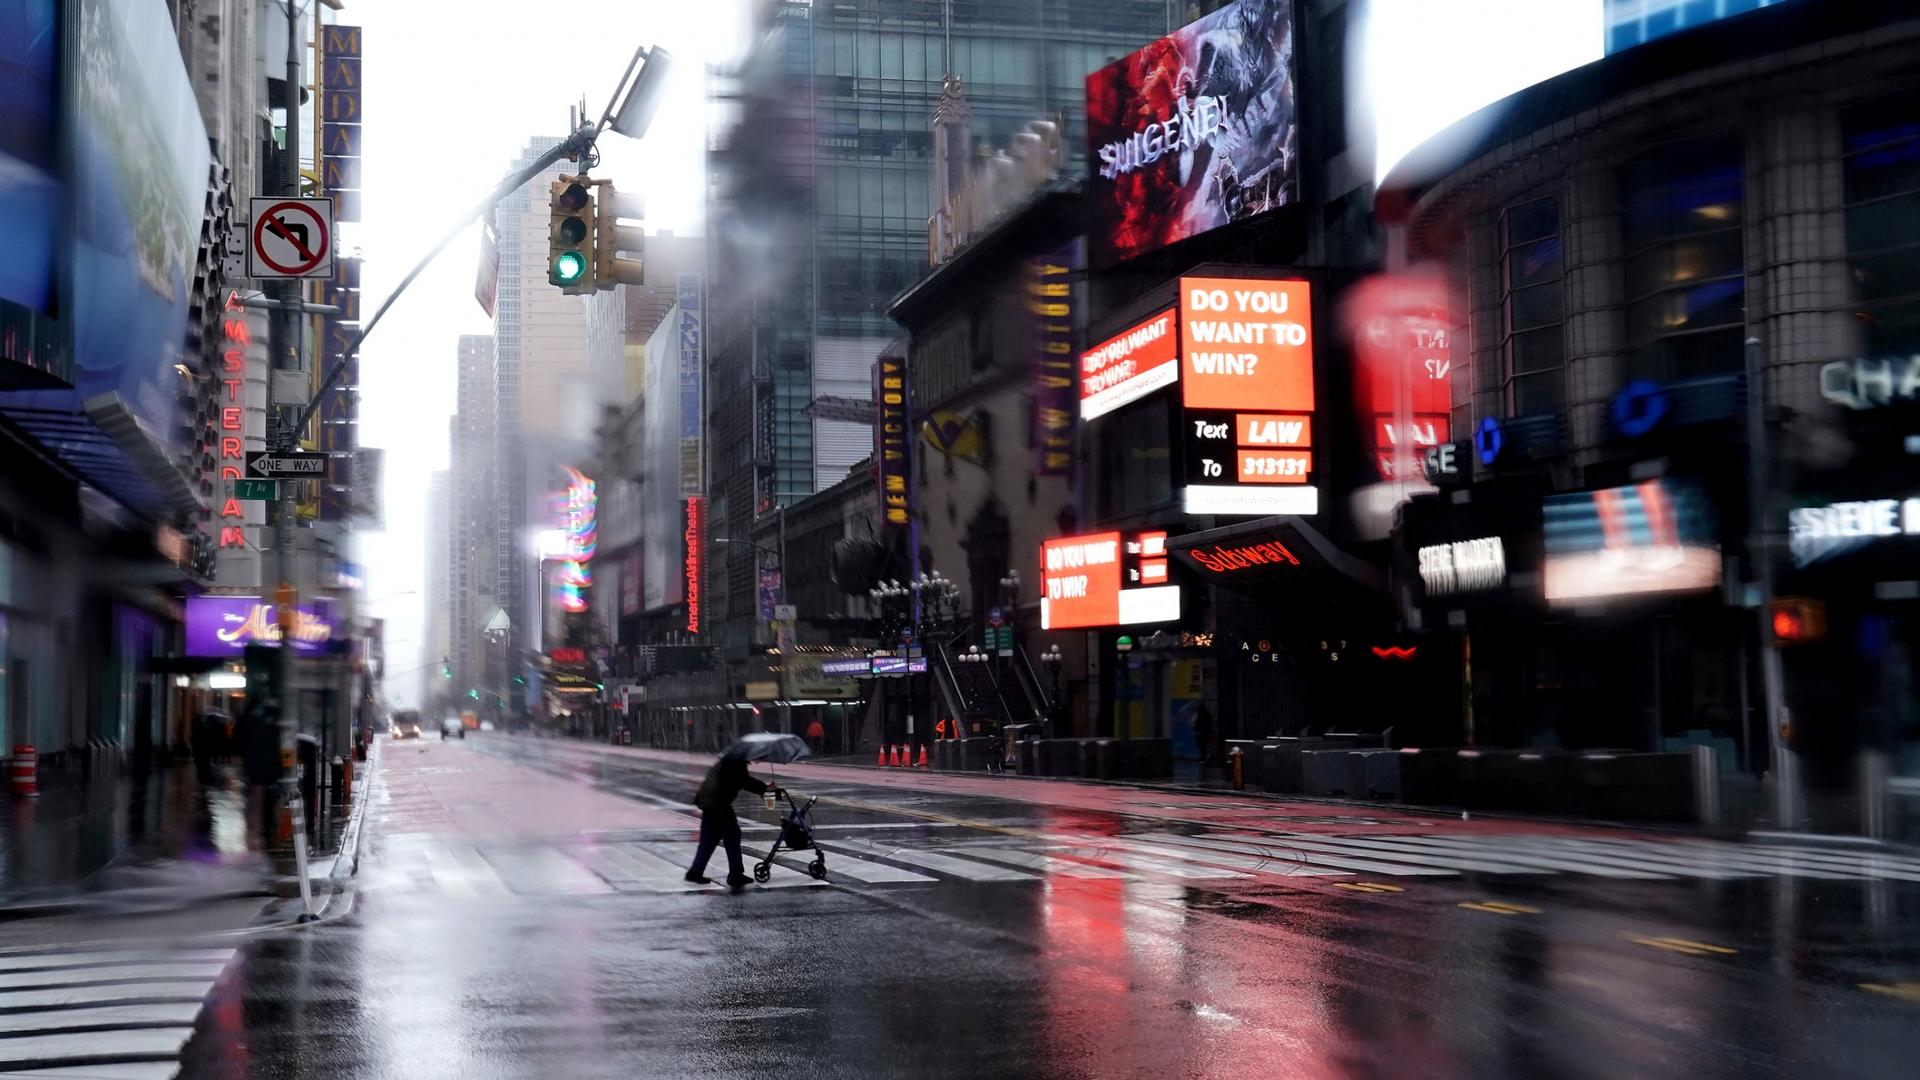 A person with a walker crosses and carrying an umbrella is seen crossing 42nd Street with brightly lit signs all around.